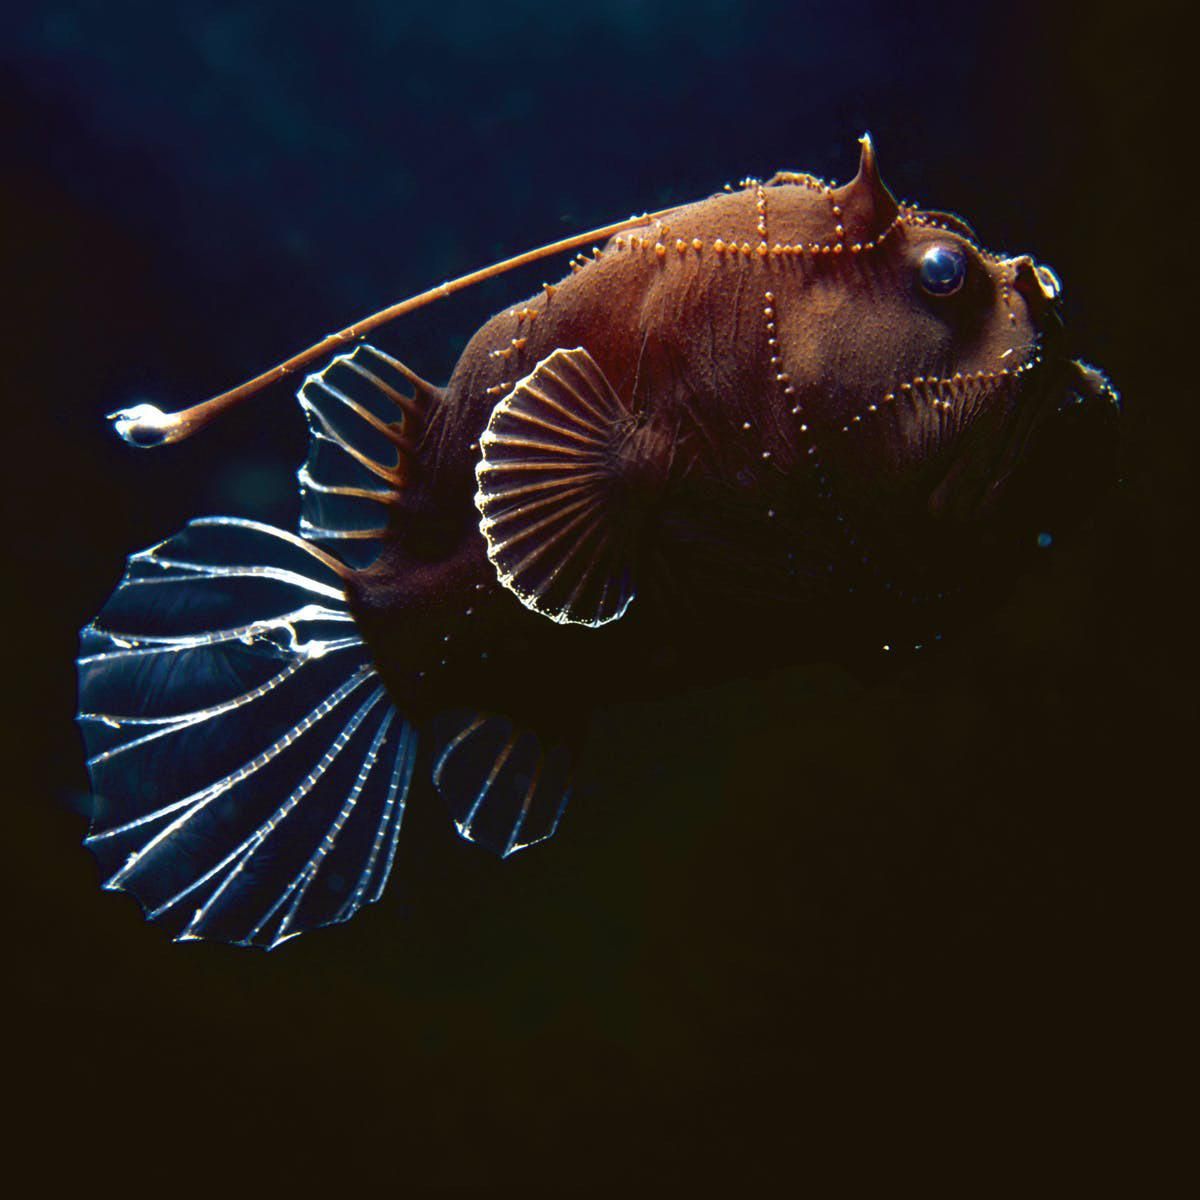 Photograph of an Angerfish